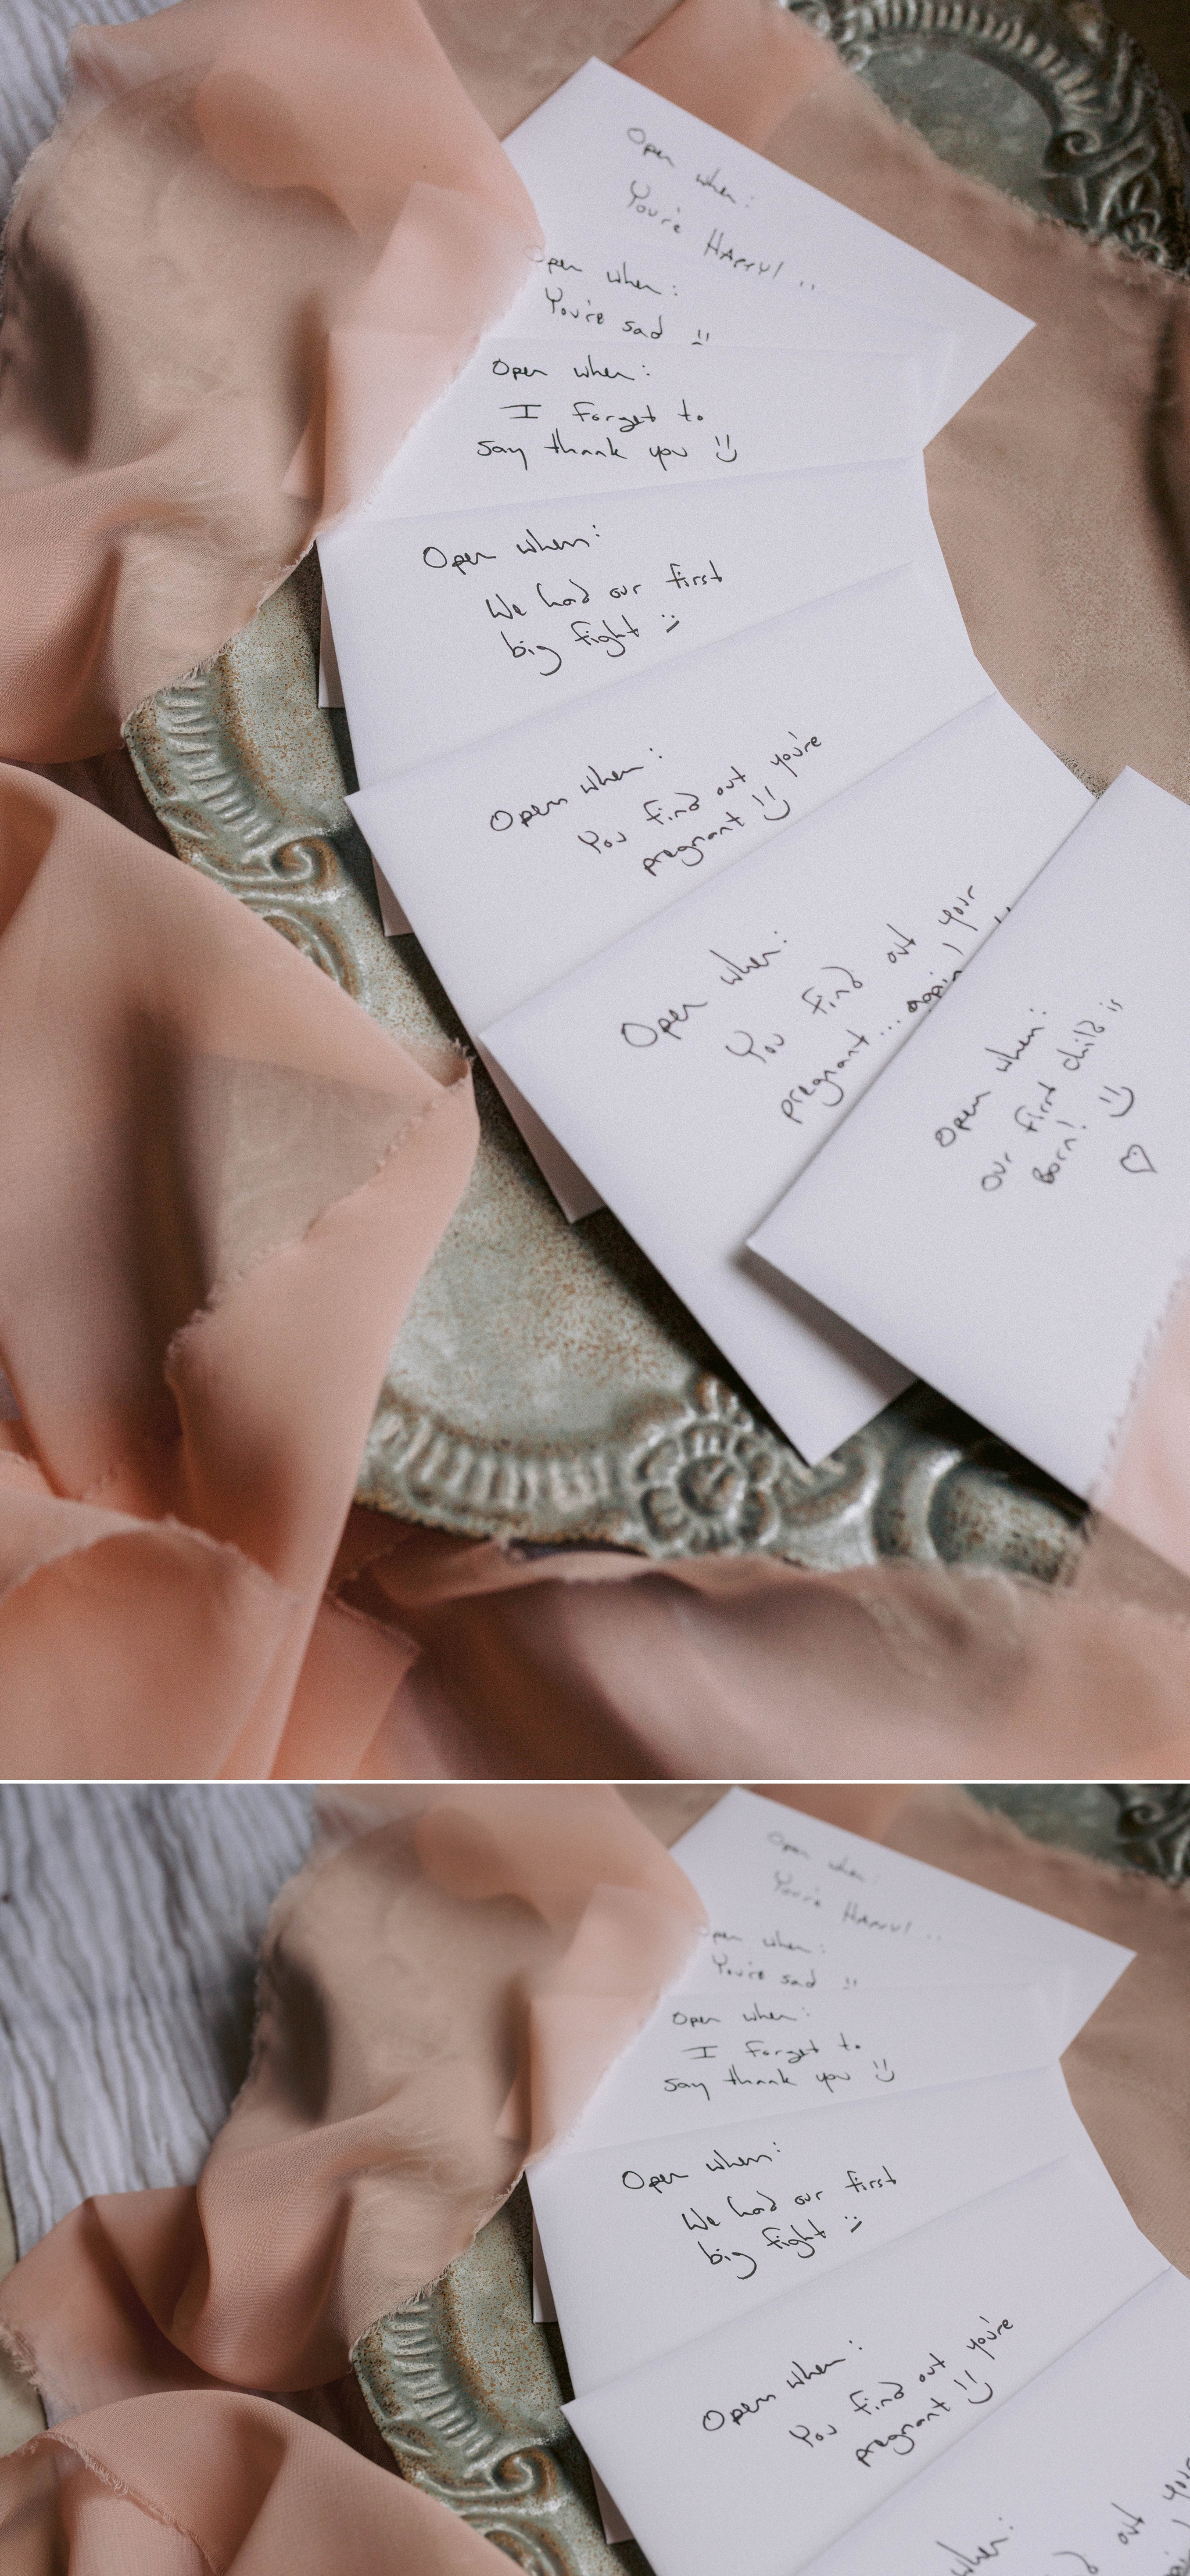  letters from the bride to the groom to read on different occasions as pre wedding gift - Honolulu Oahu Hawaii Wedding Photographer 